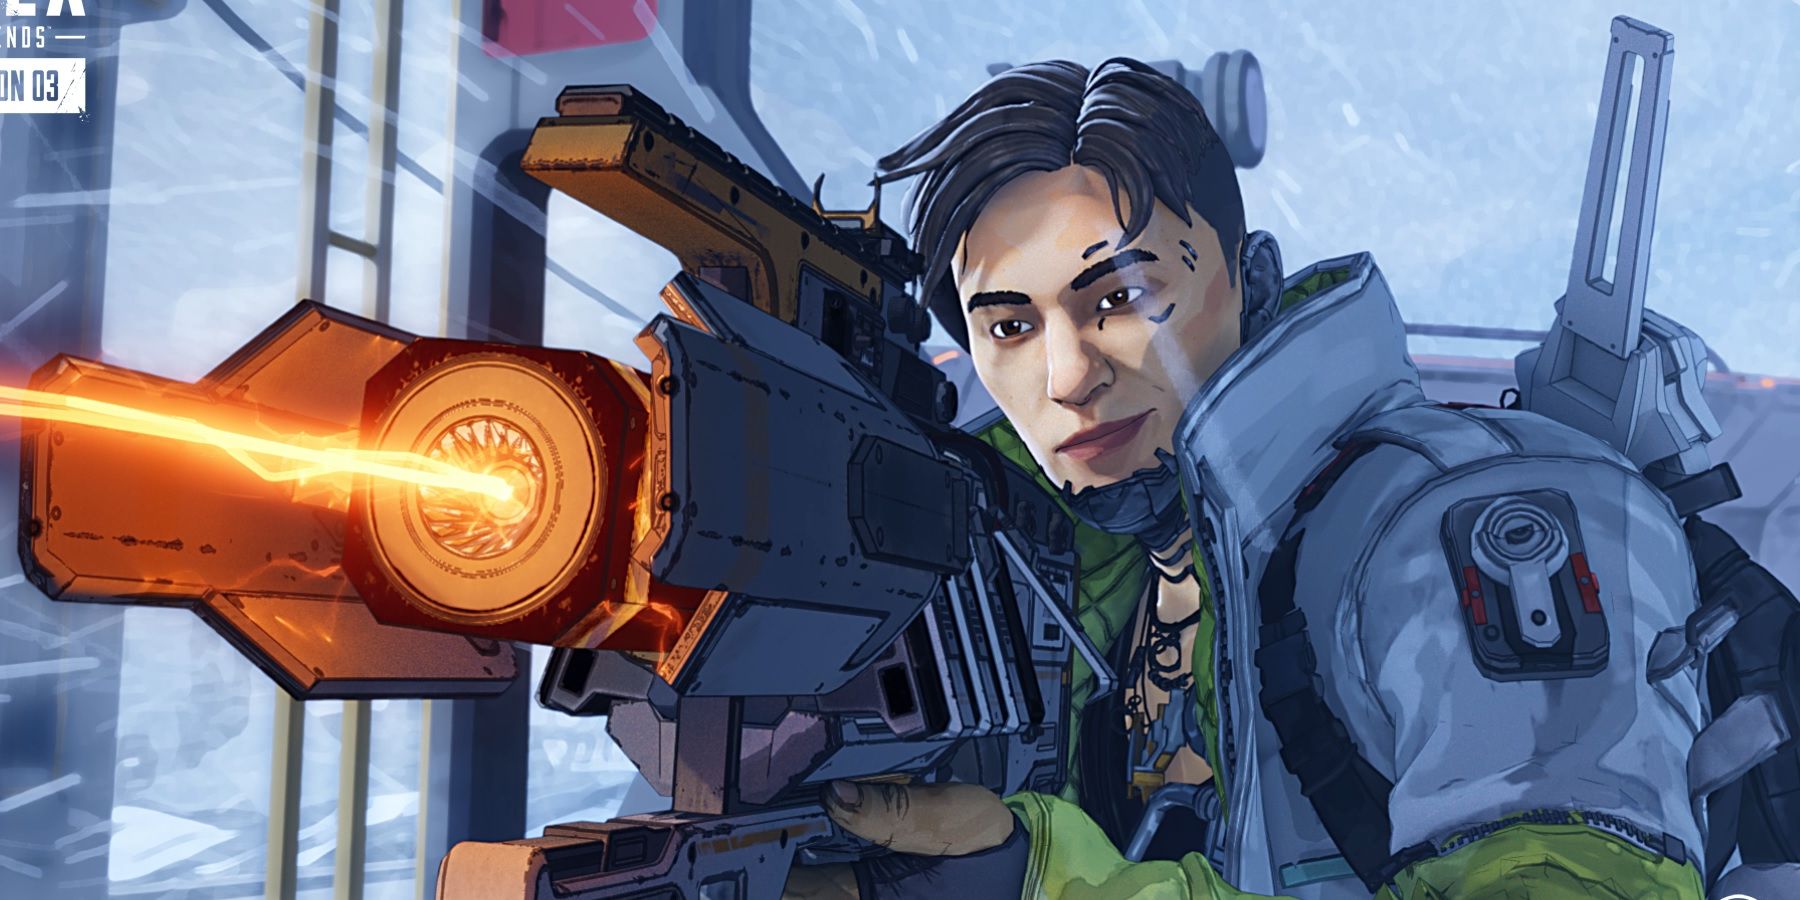 Why The Self-Revive Mechanic In Apex Legends Was So Unpopular